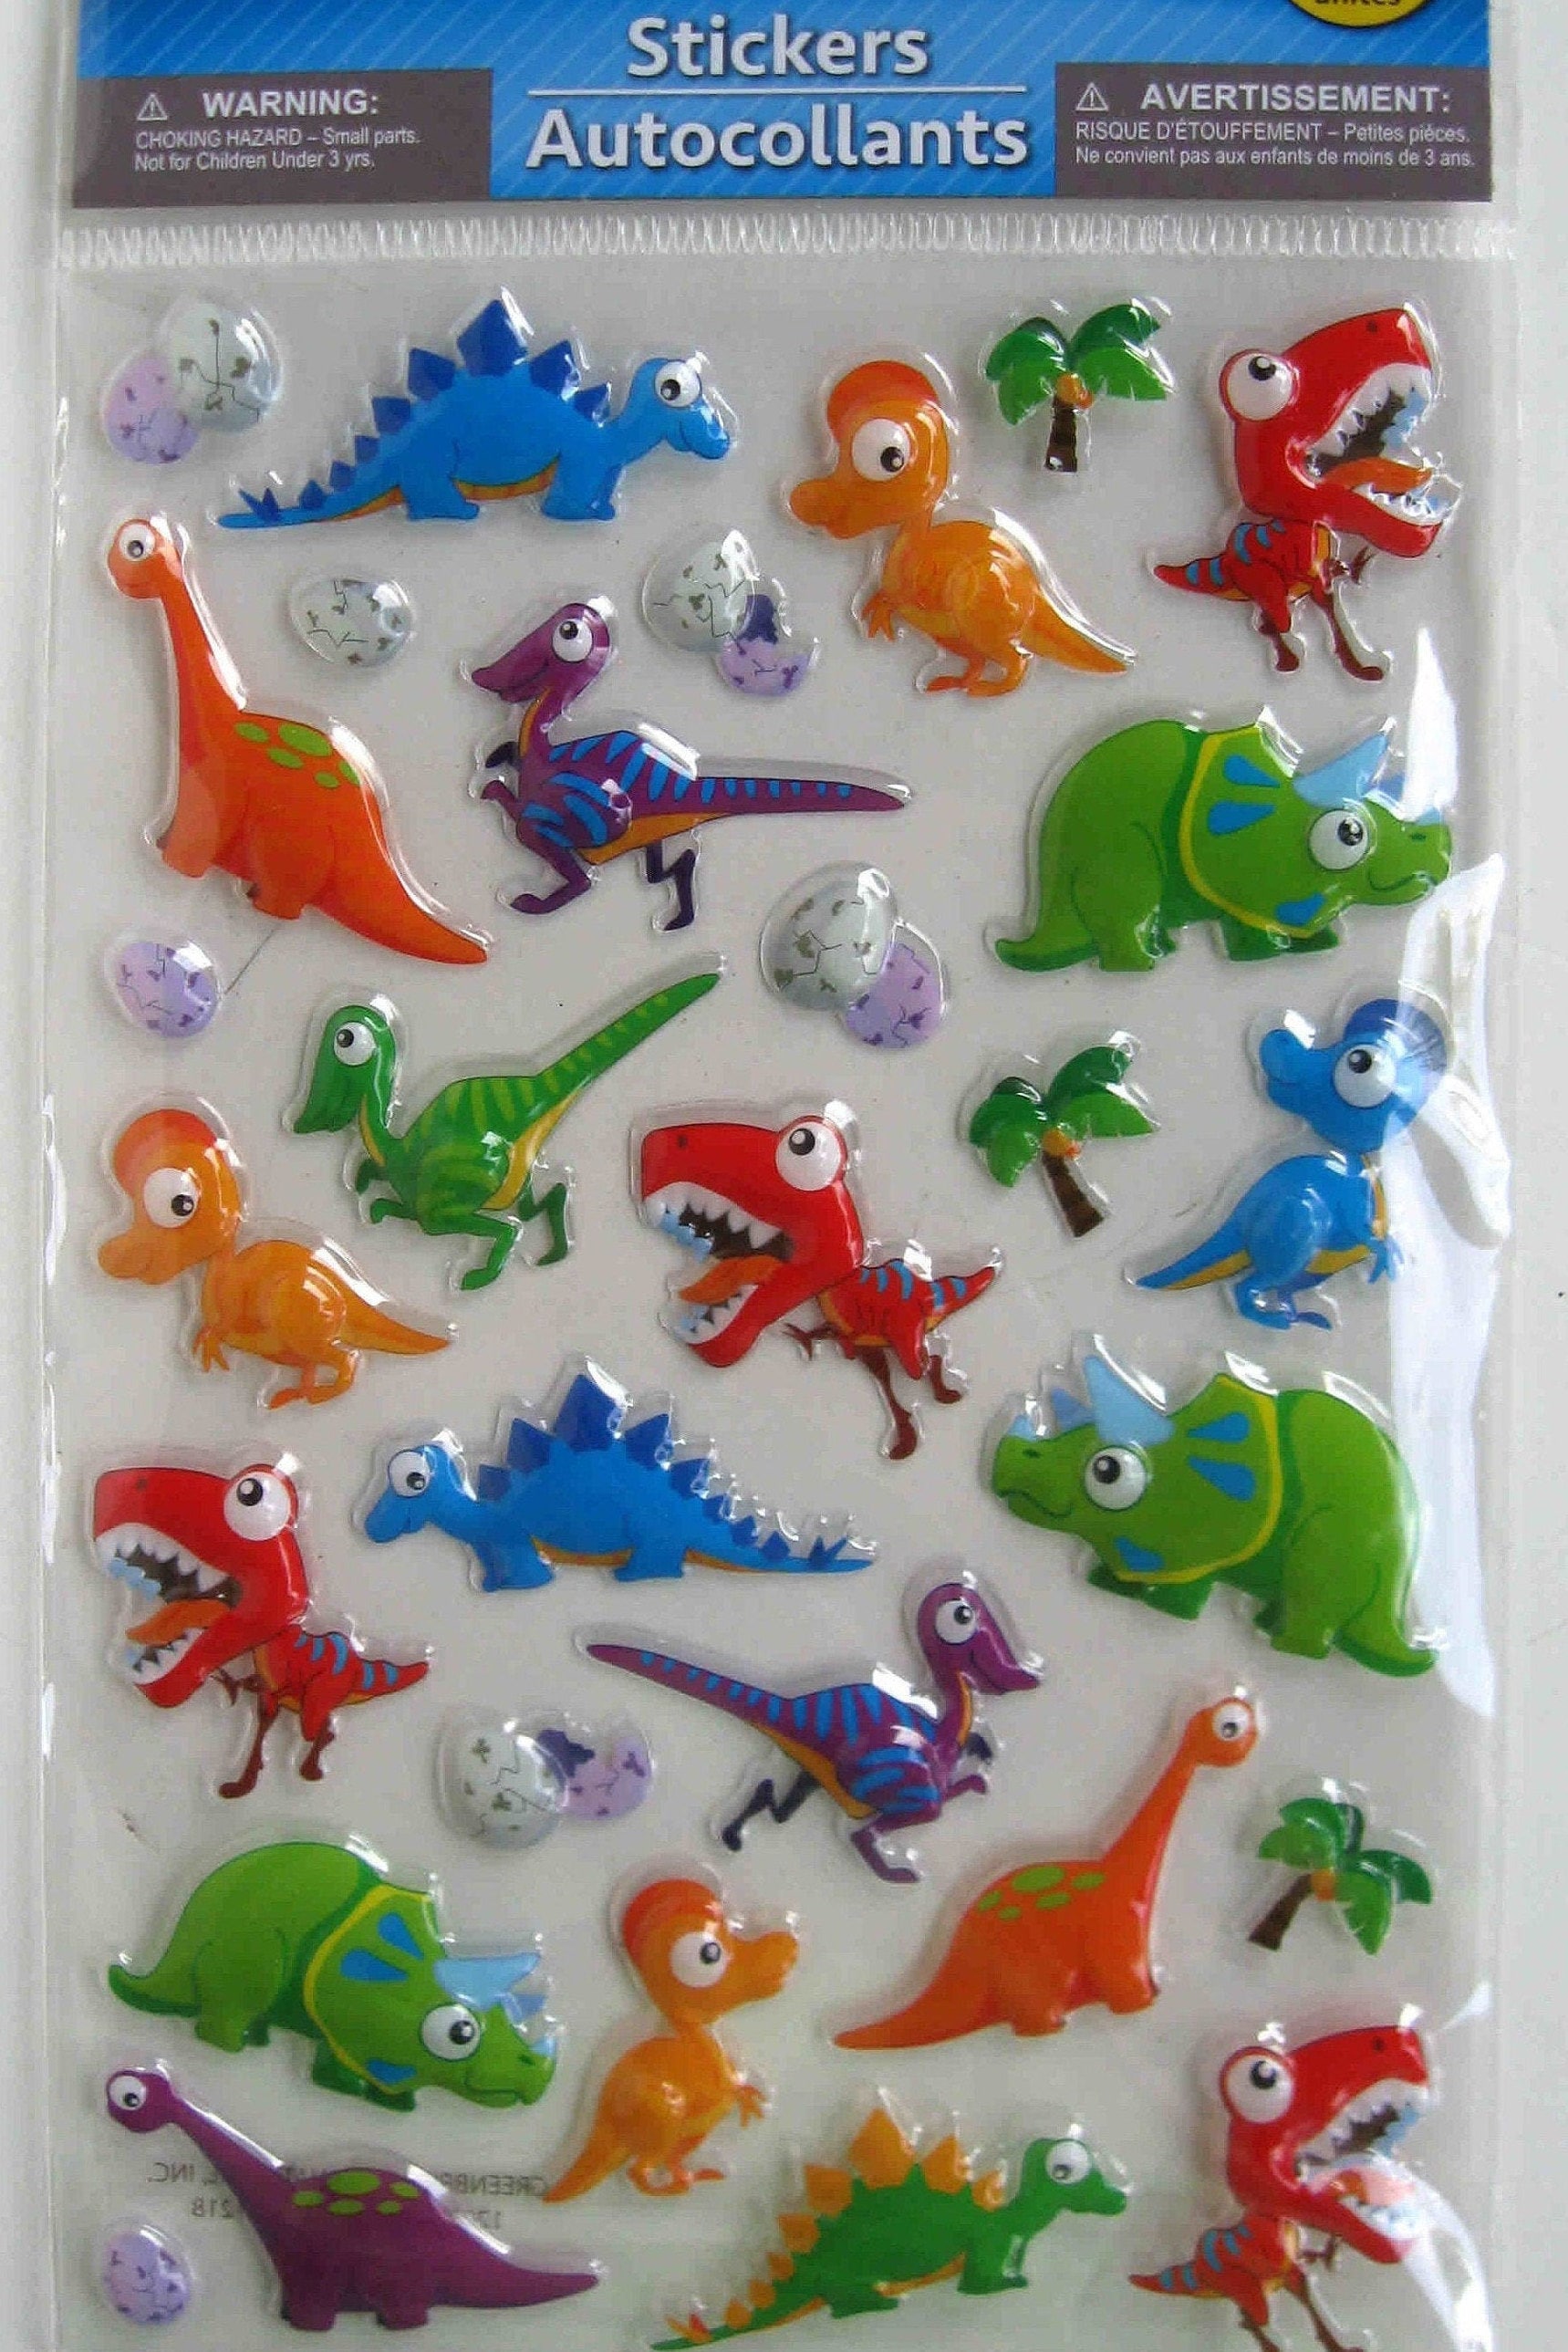 BulbaCraft 100 Pcs Cute Dinosaur Stickers for Kids 2–4 Year Old –  Waterproof Vinyl Dino Water Bottles - Toddlers 2-4 Years Birthday Party  Favors : : Home